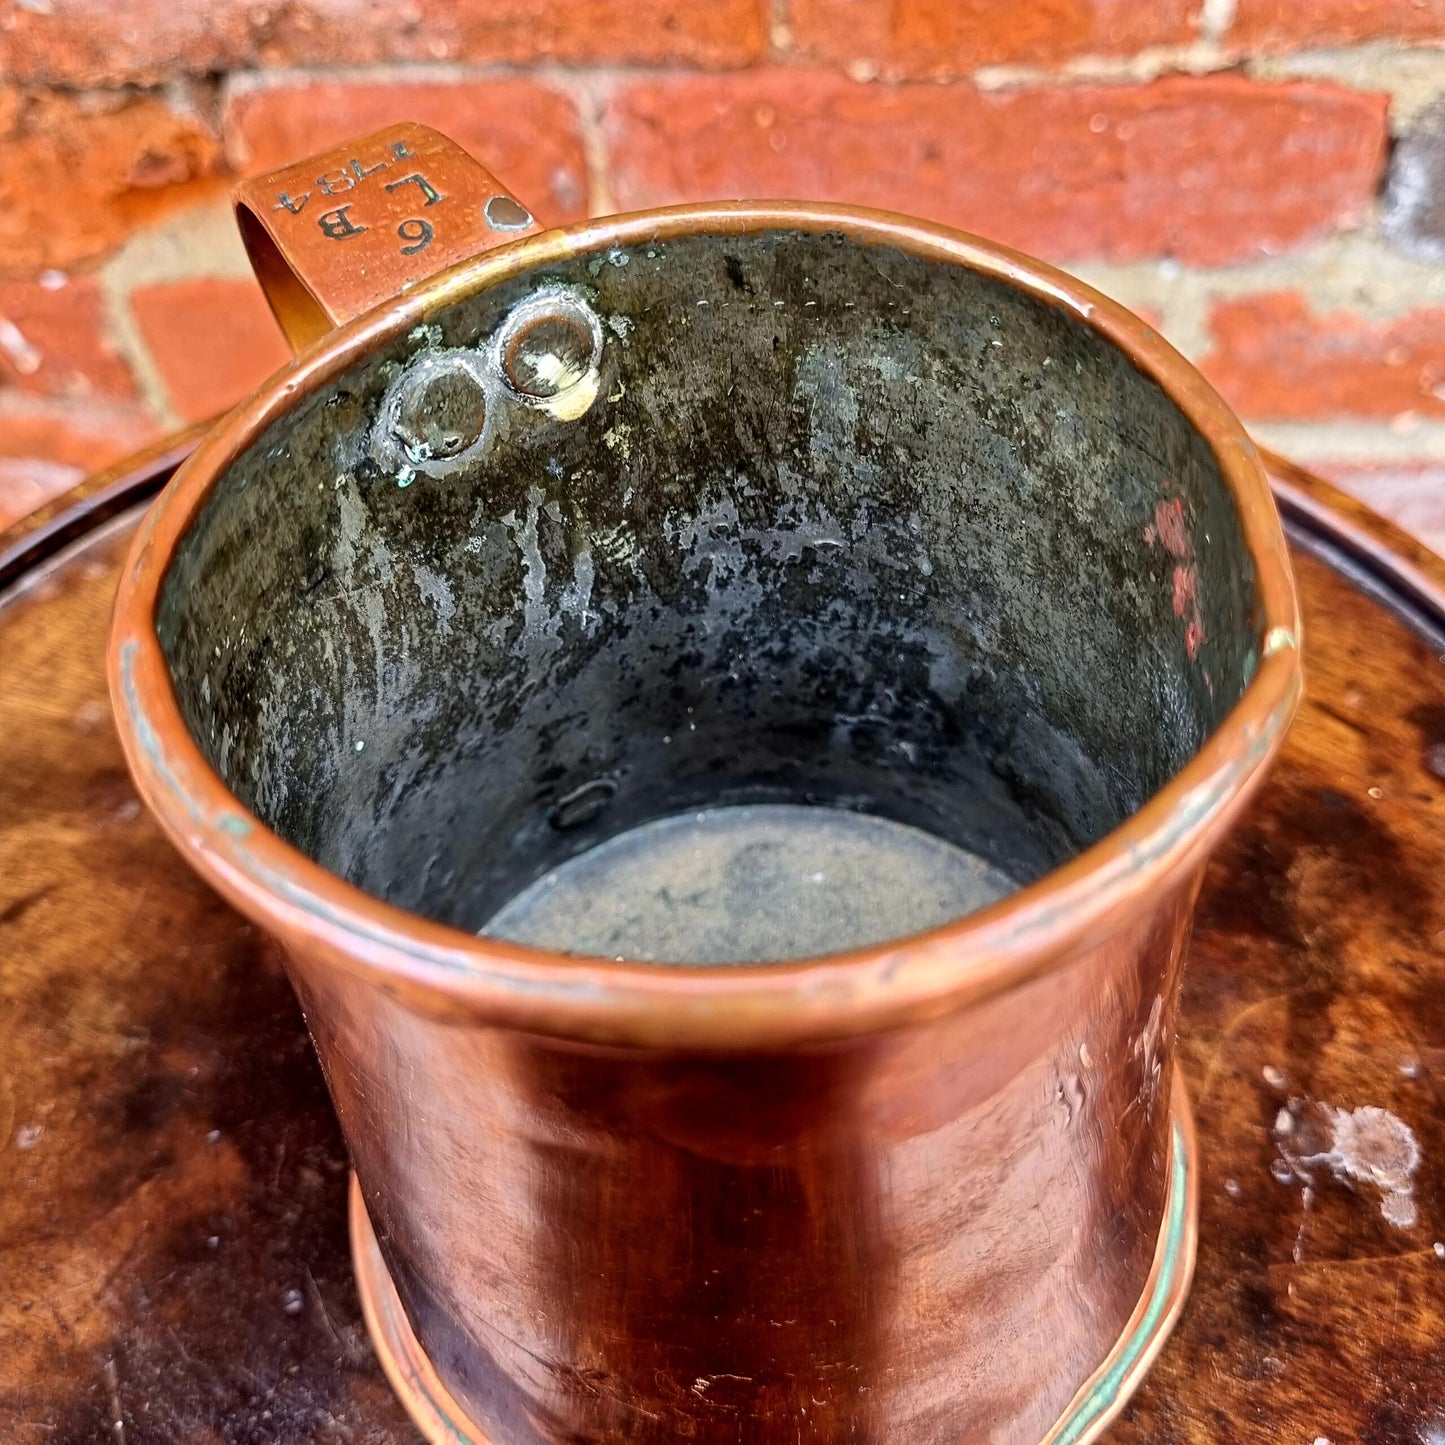 18th Century English Antique Copper Tankard or Measure Dated 1784